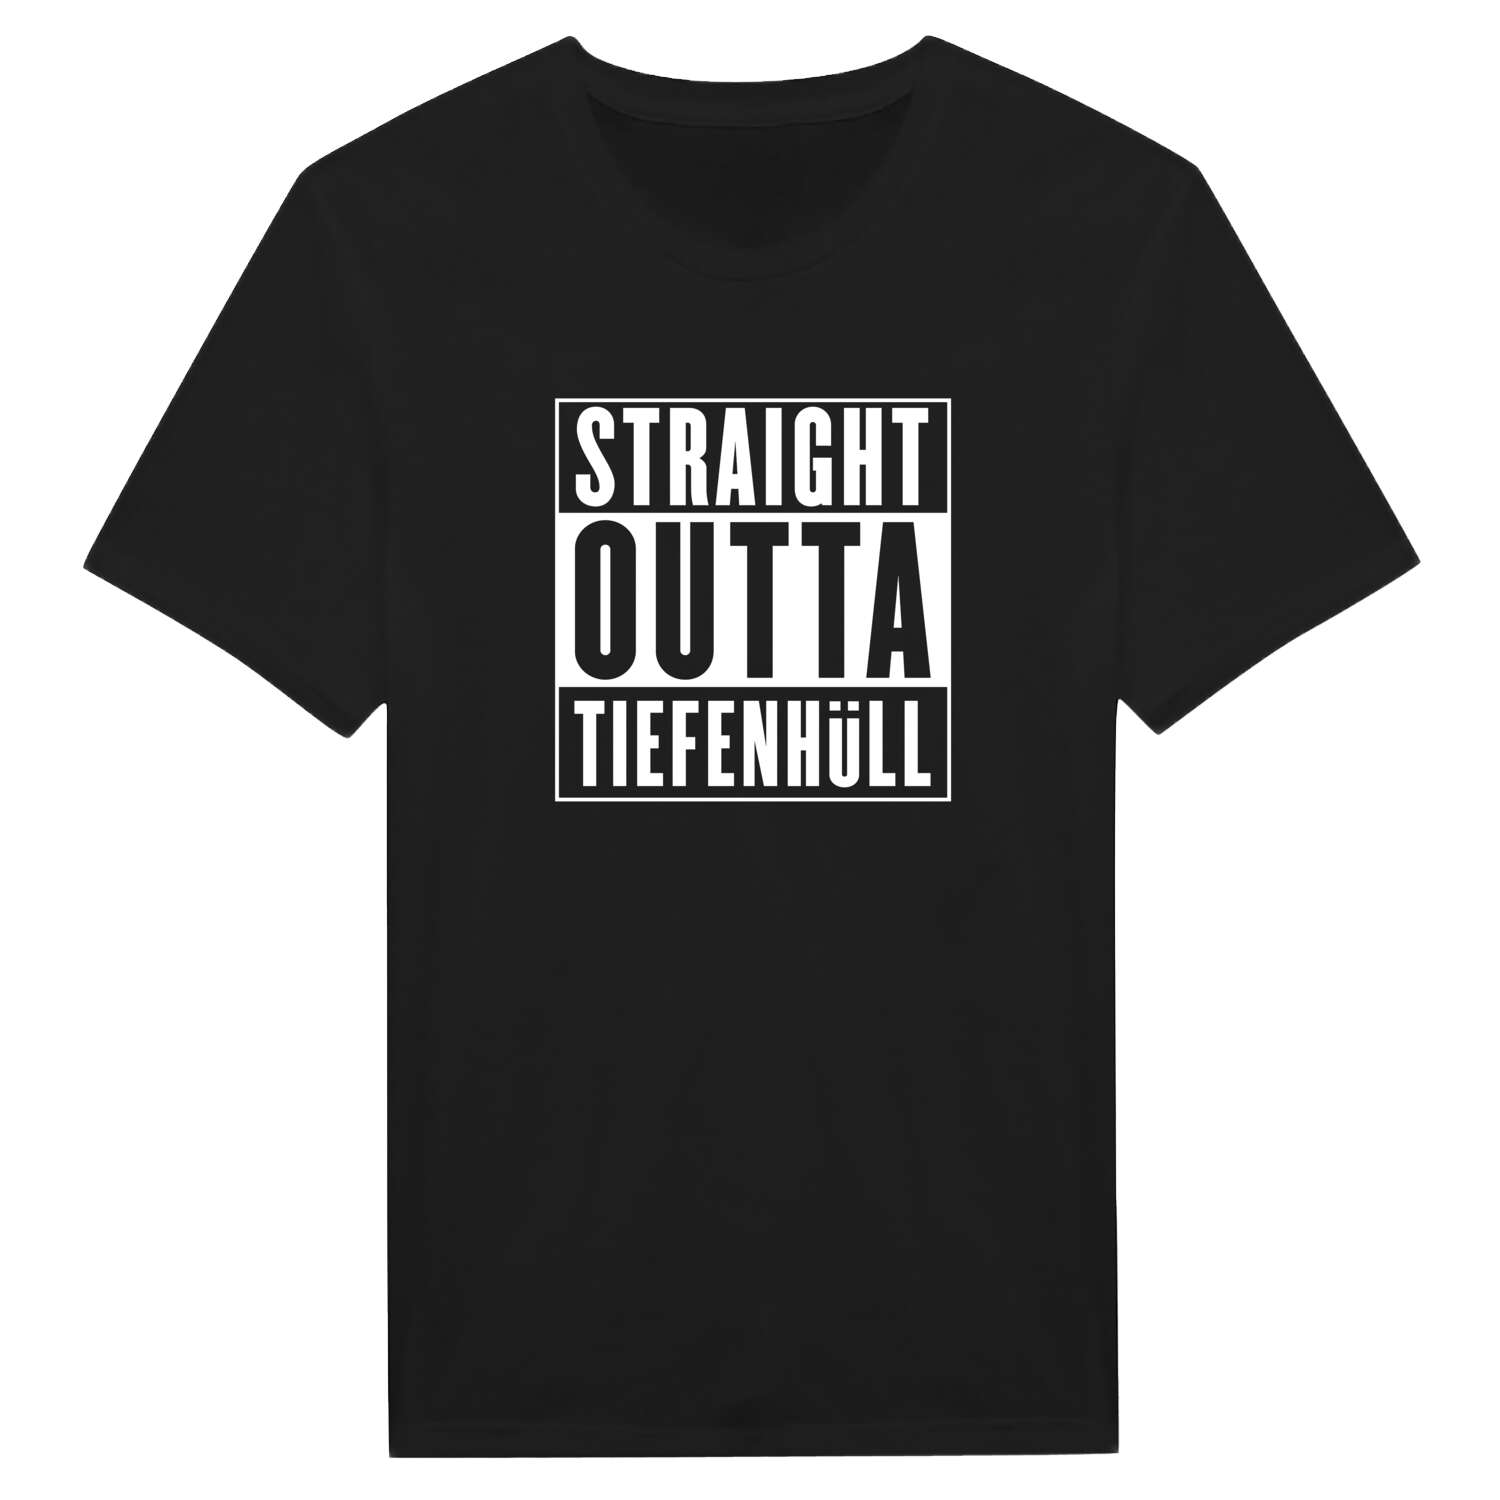 Tiefenhüll T-Shirt »Straight Outta«